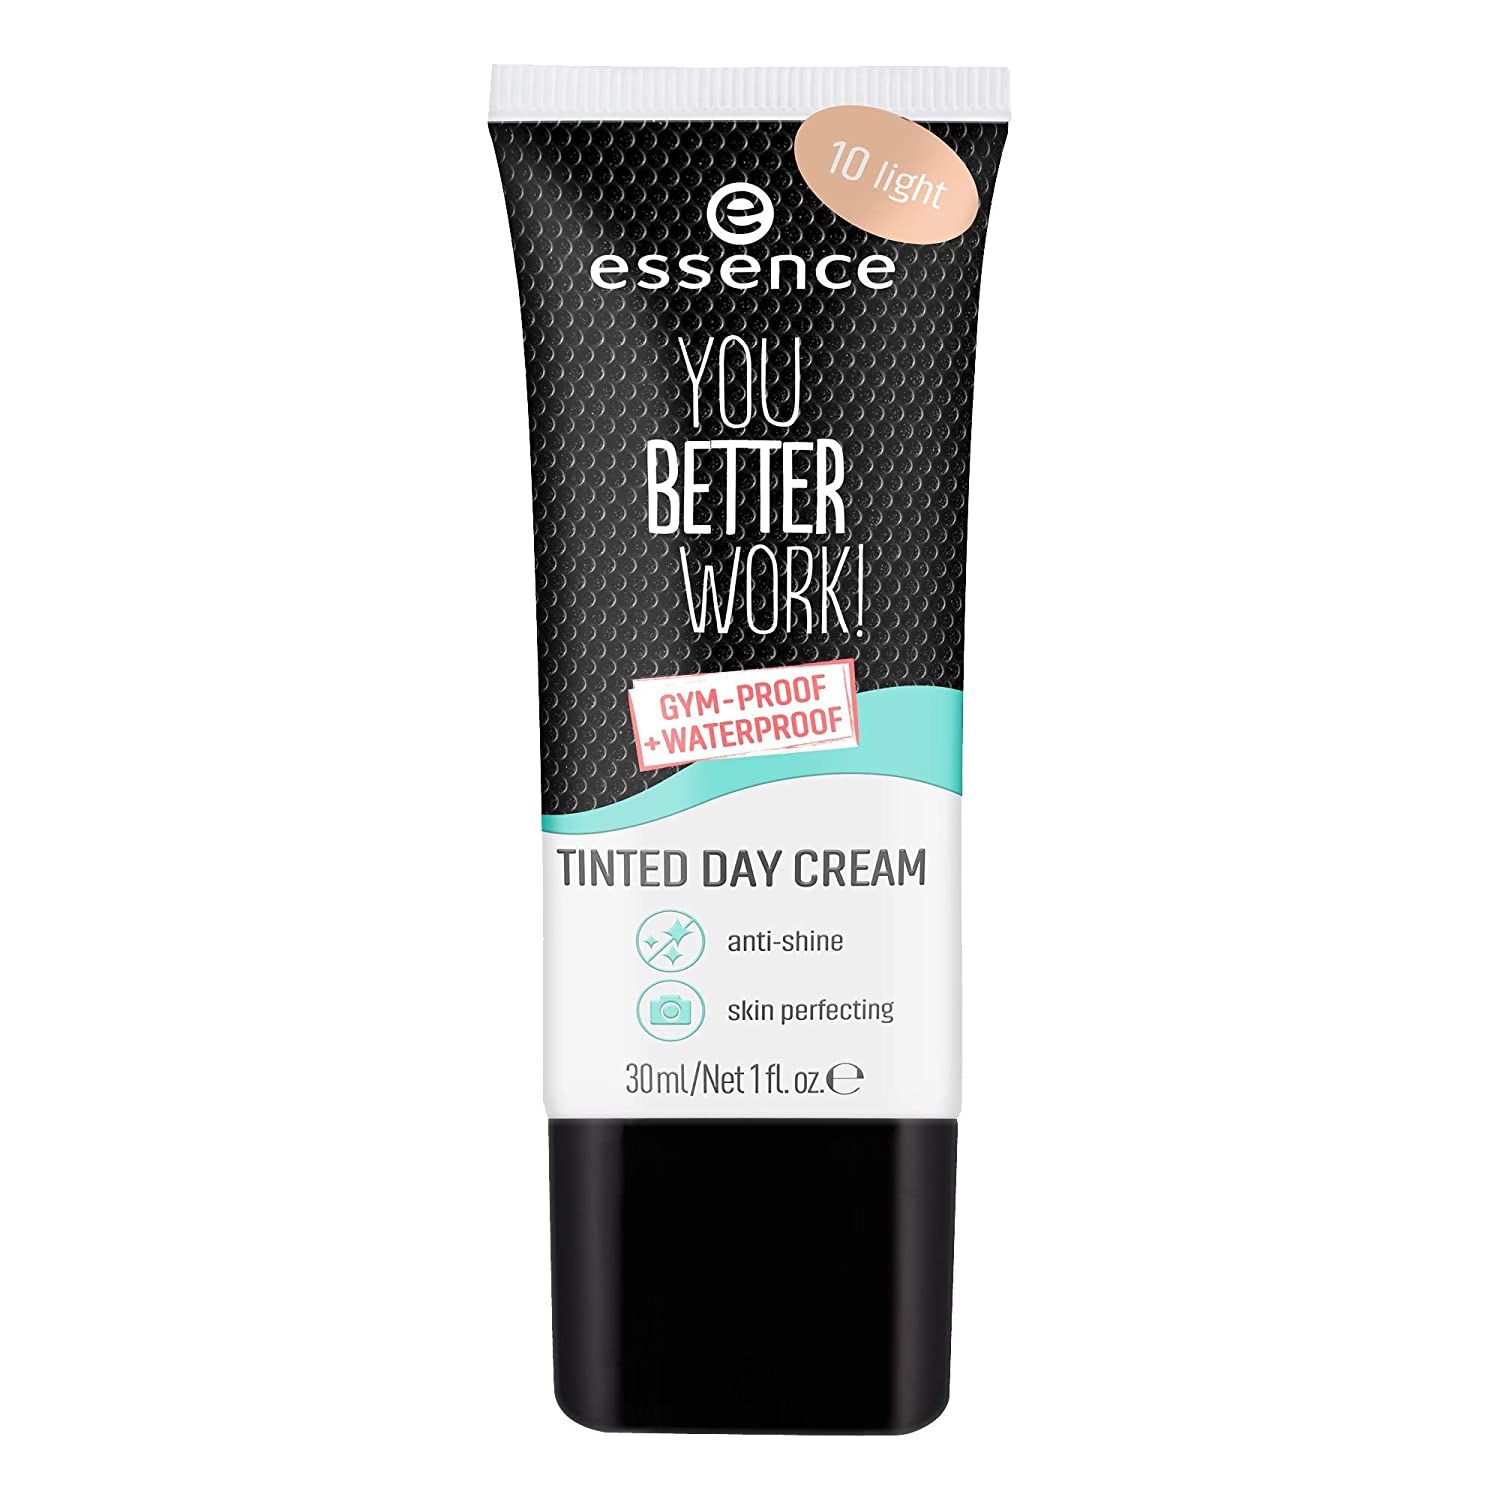 essence cosmetics essence You Better Work! Tinted Day Cream Make Up Foundation No. 10 Light, Nude Nourishing, UVA, UVB Filter, Matte, SPF 20, Vegan, Oil-Free, with Sun Protection Factor, with SPF (30 ml), ‎10 light